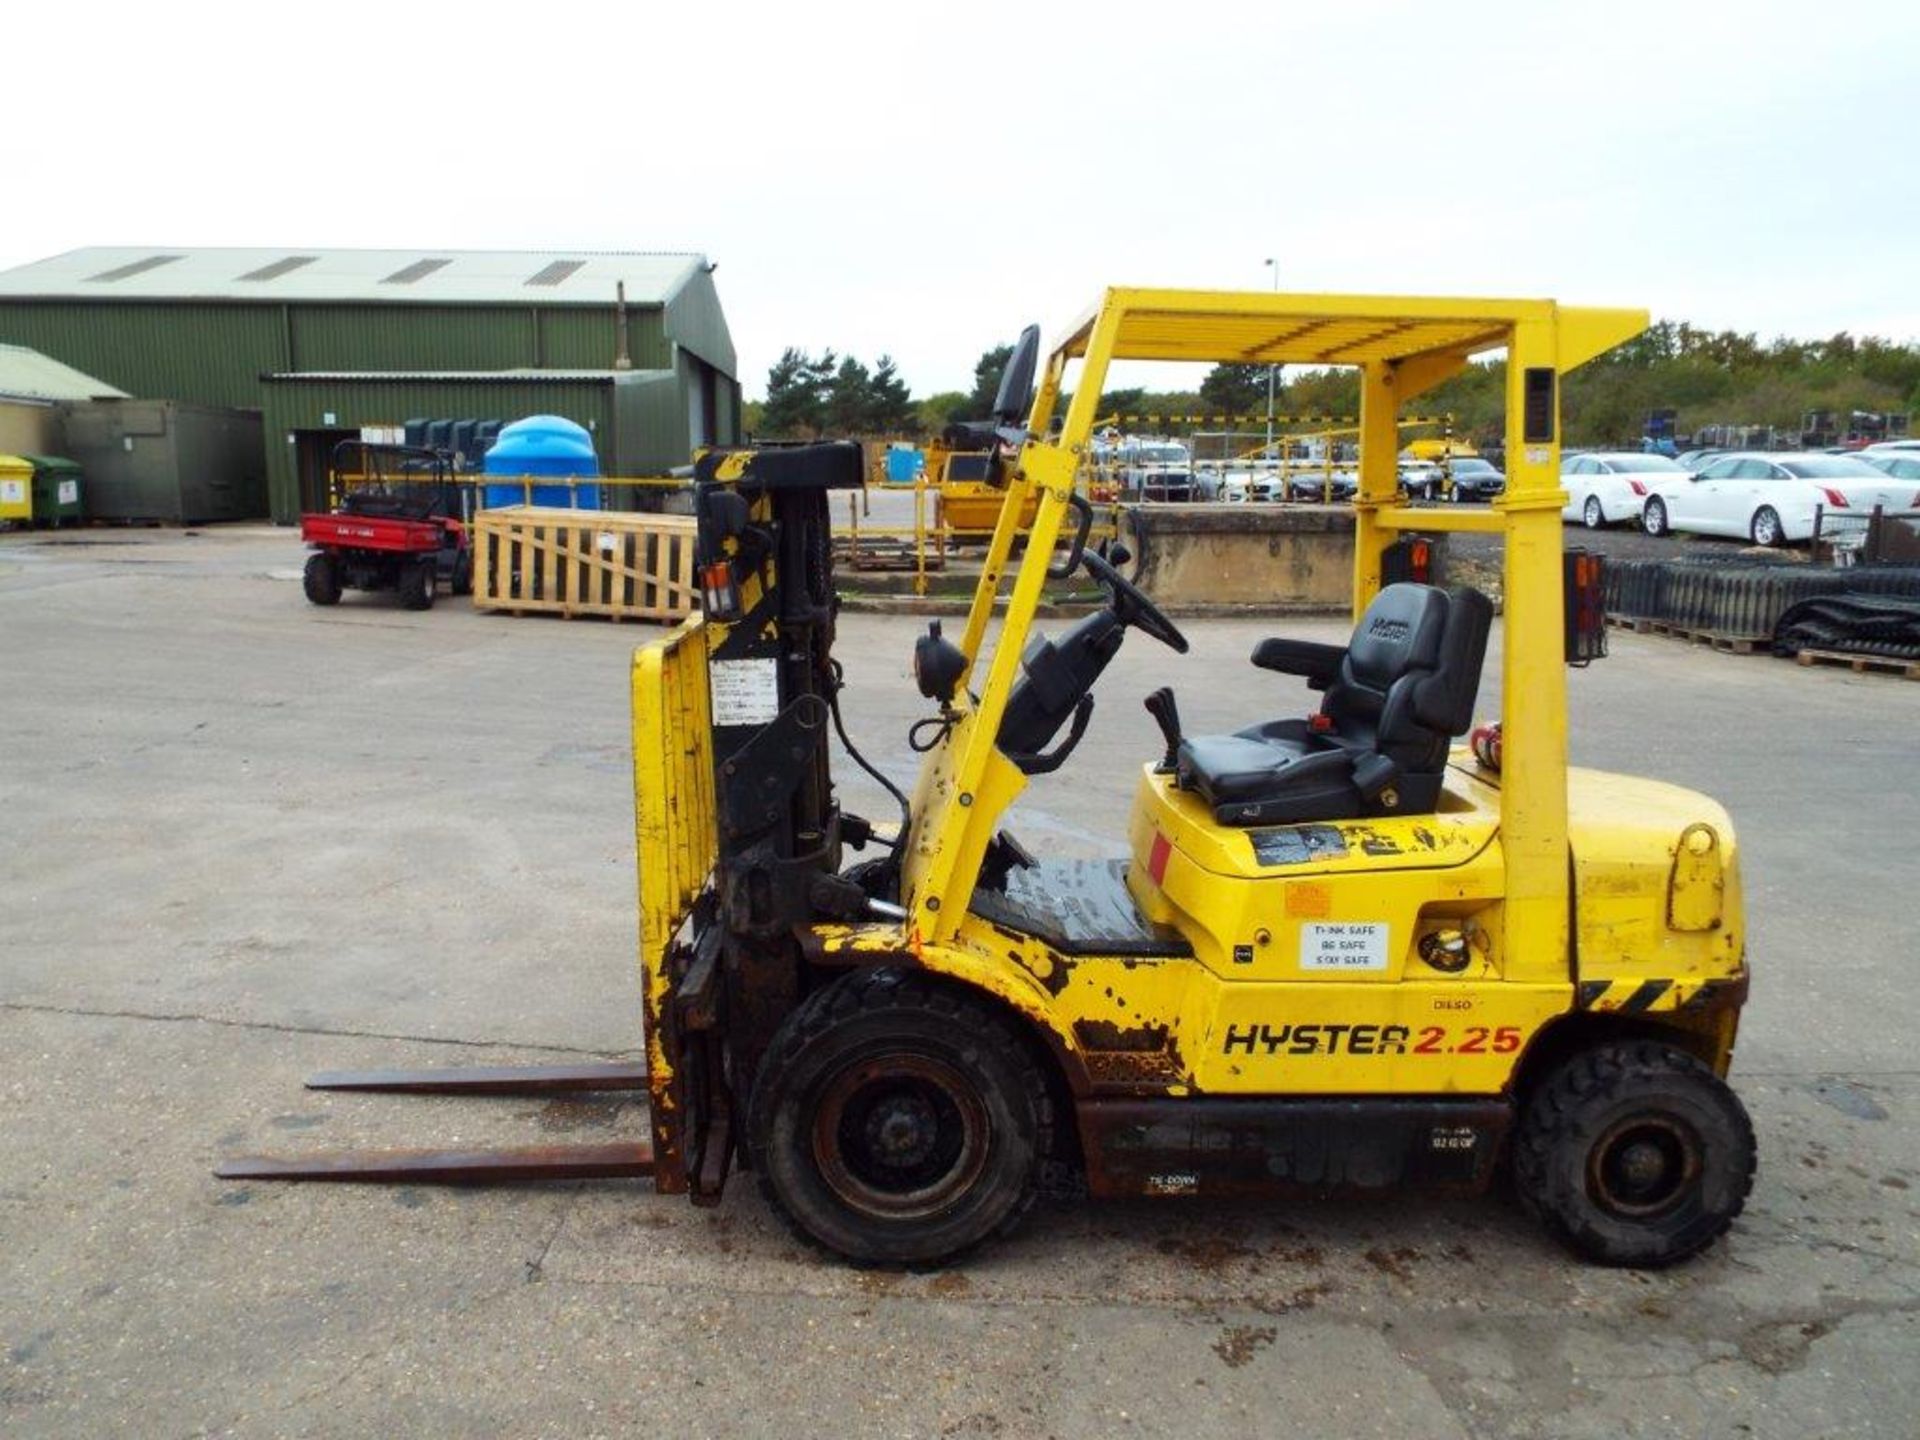 Hyster 2.25 Class C, Zone 2 Protected Diesel Container Forklift - Image 3 of 24